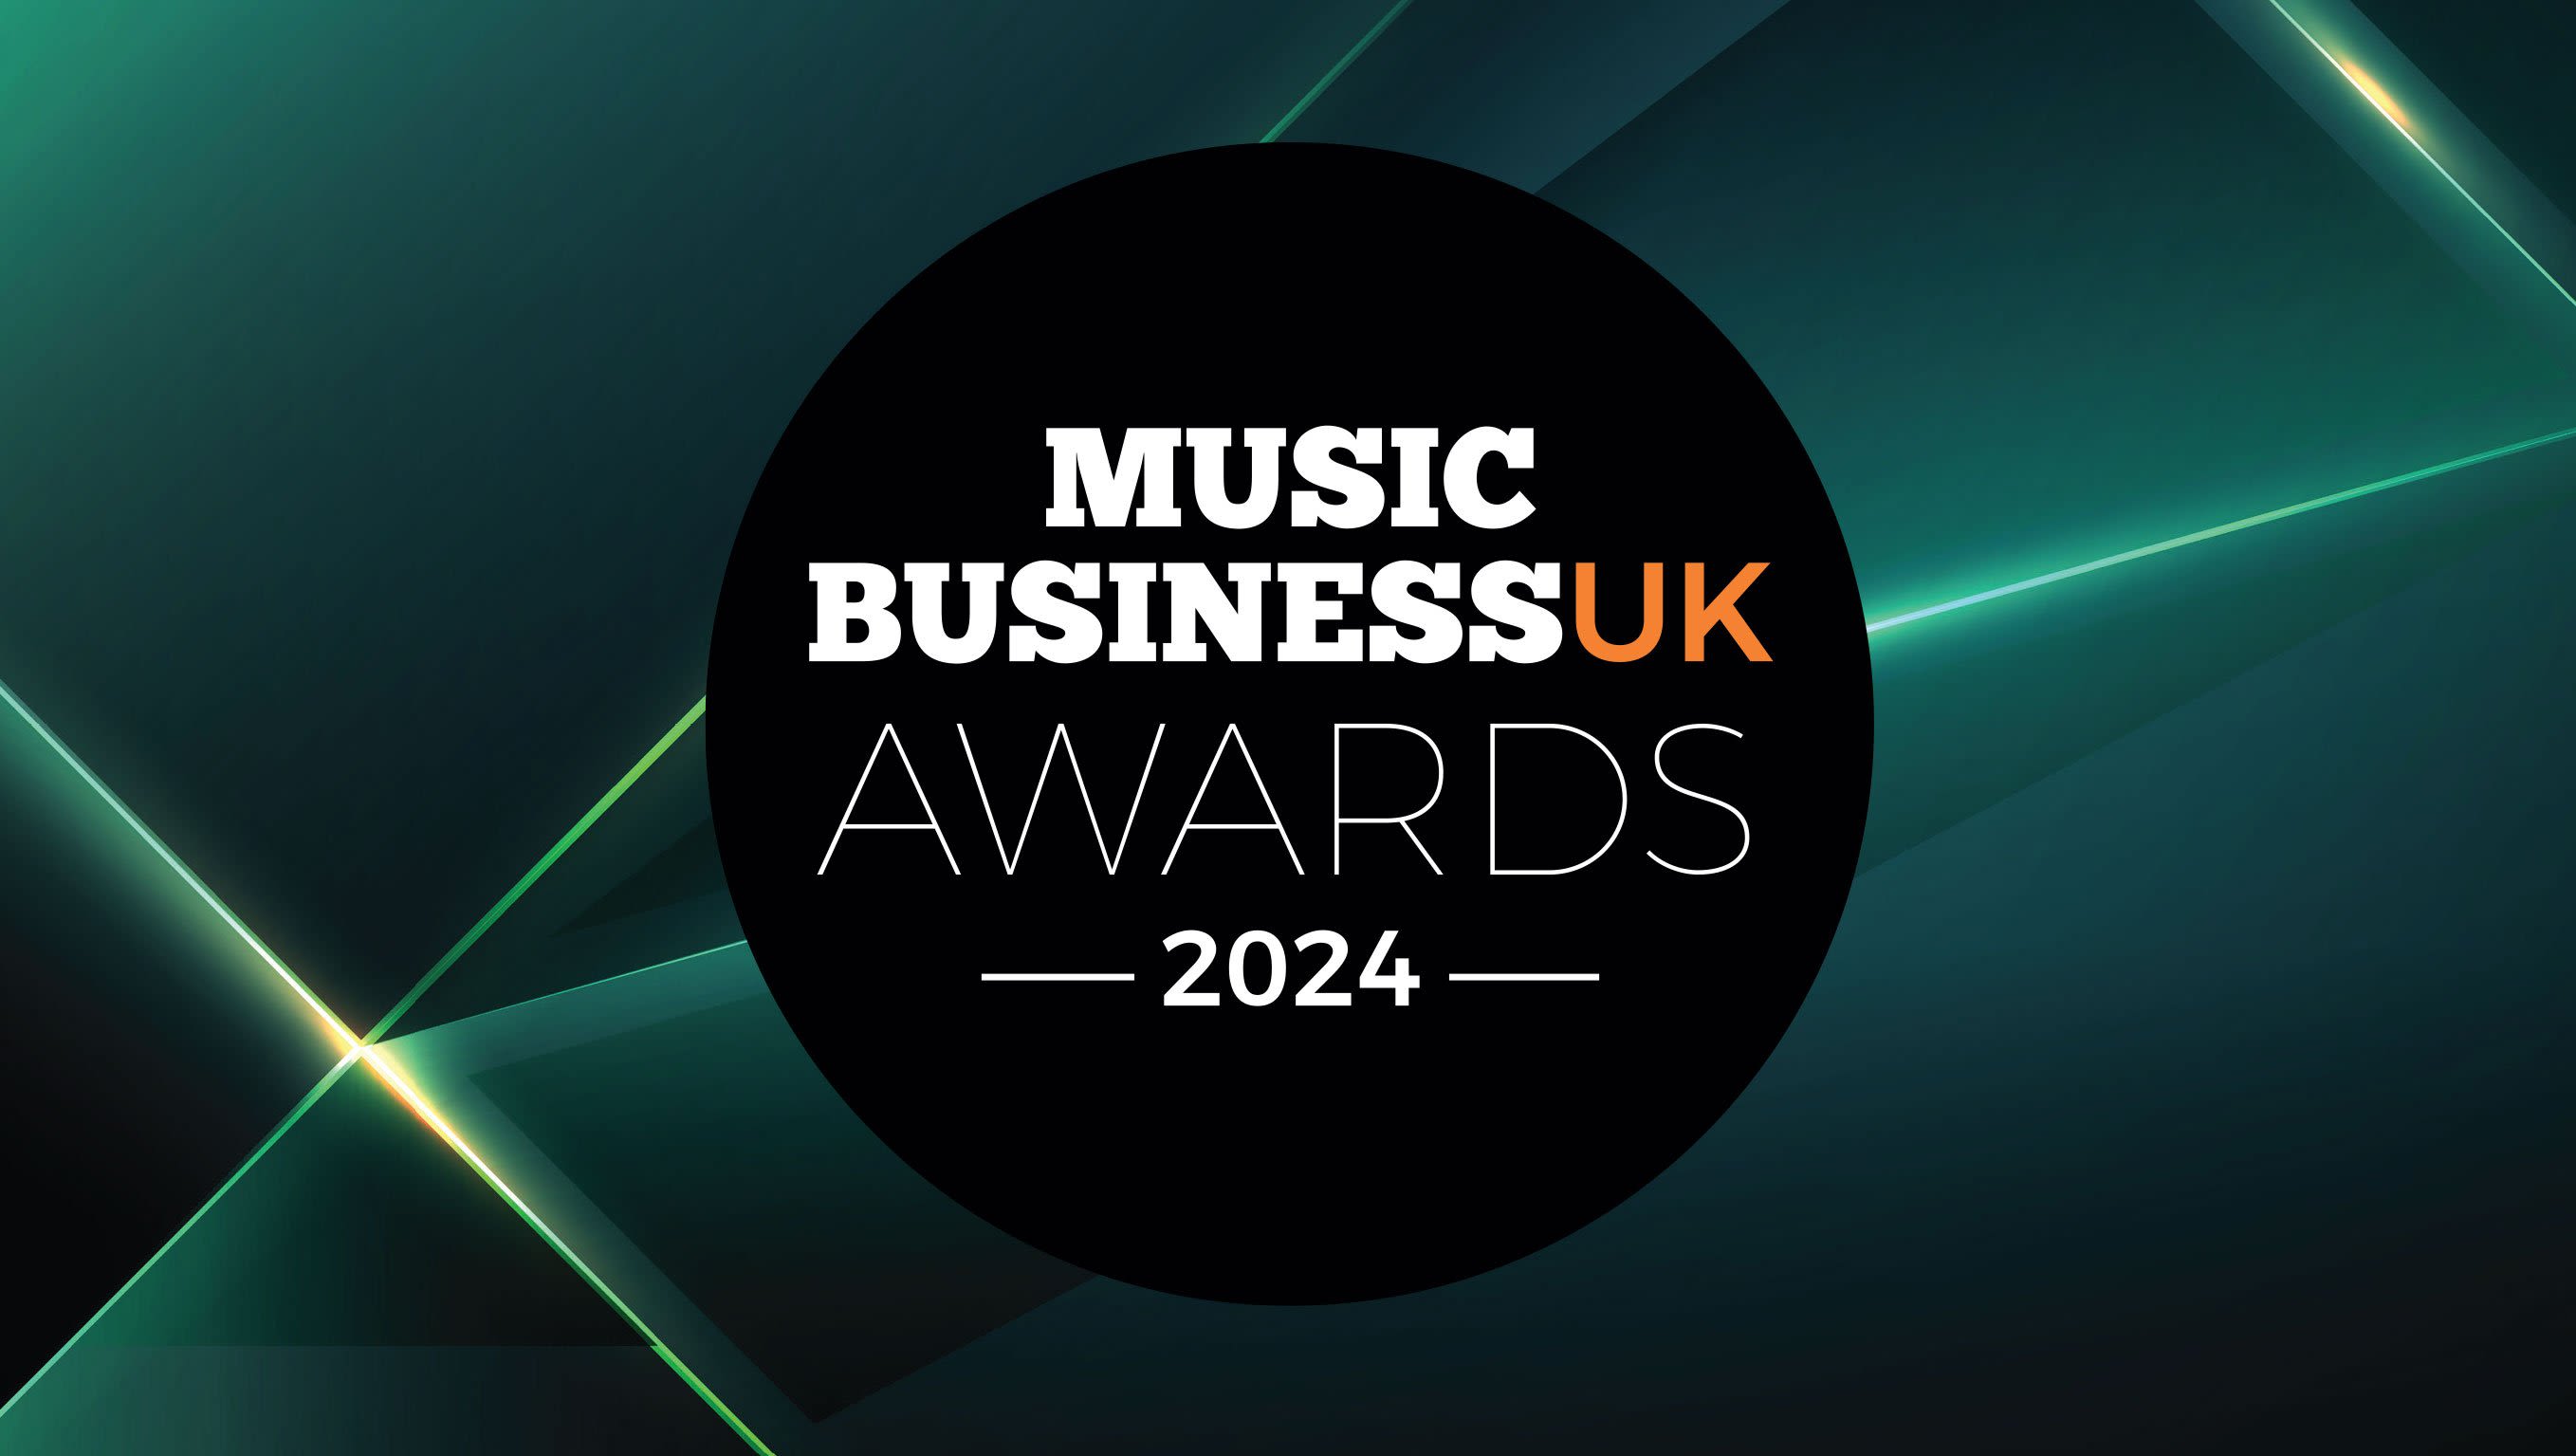 Save The Date: MBW presents the Music Business UK Awards in London, November 5 - Music Business Worldwide